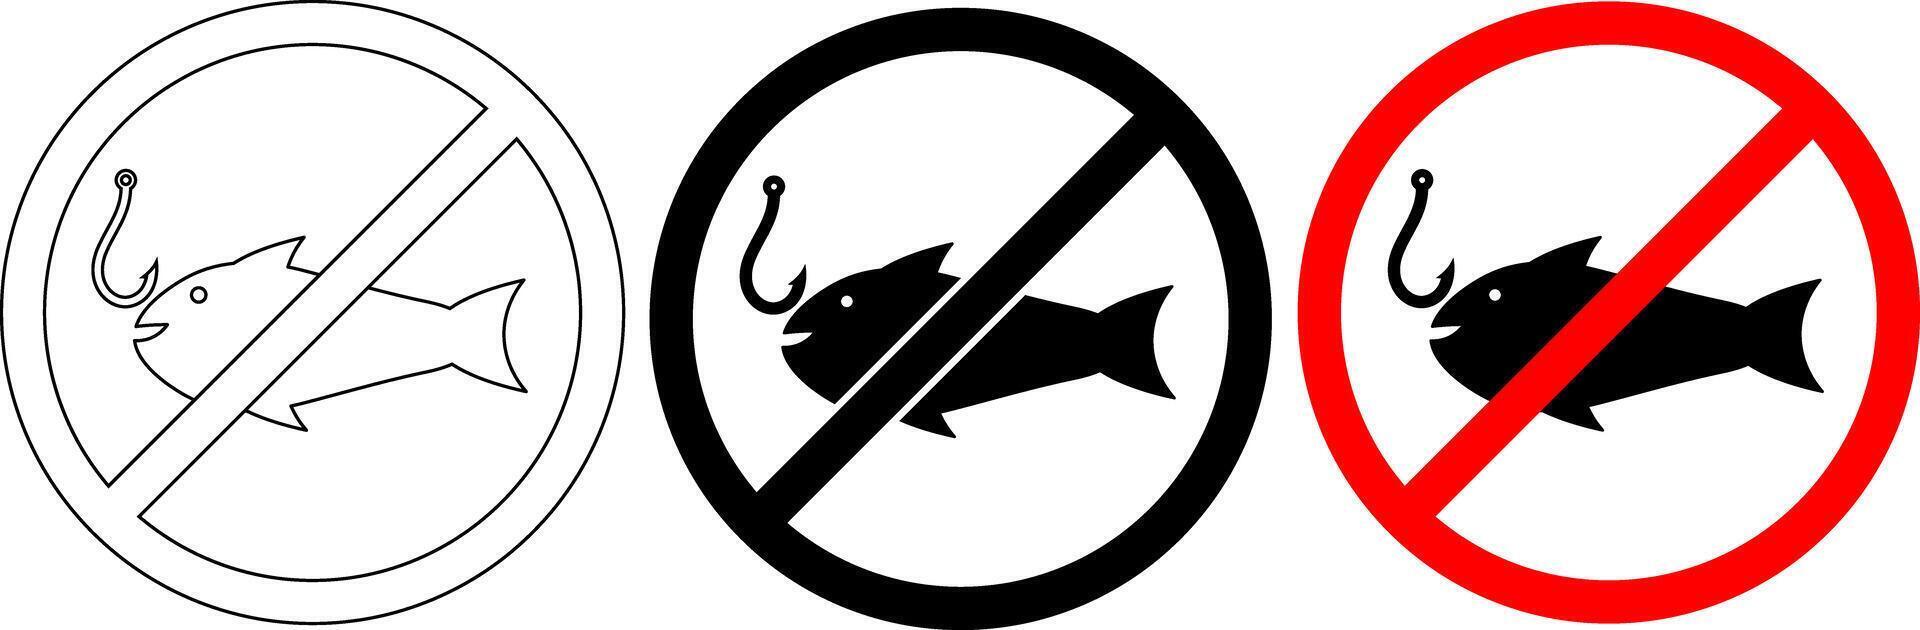 outline silhouette no fishing sign set vector